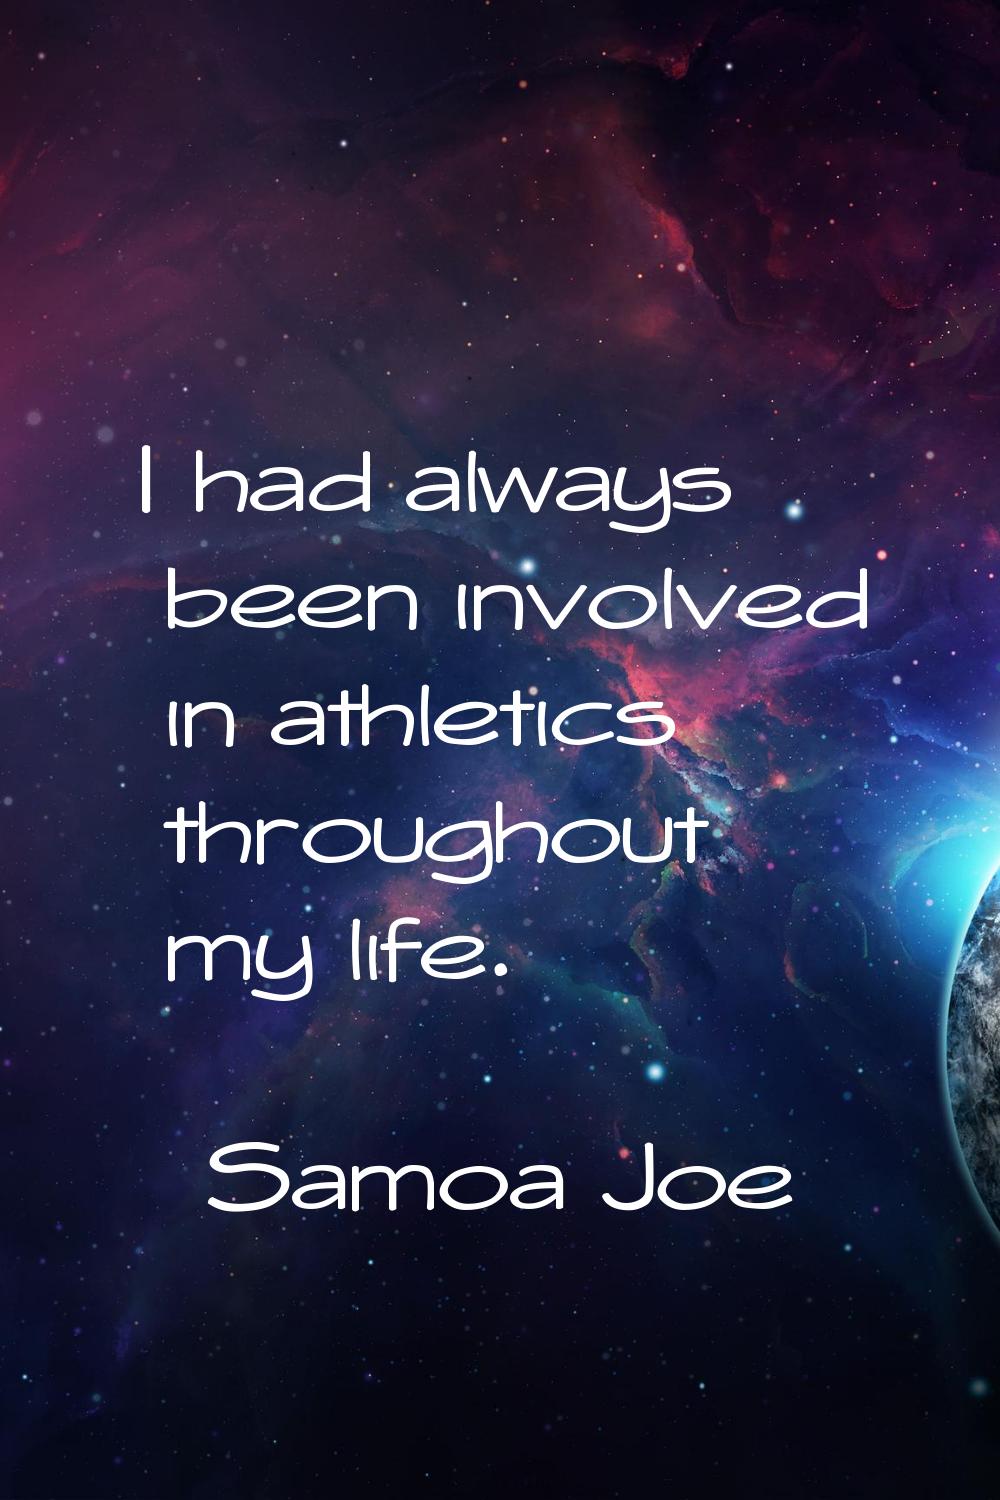 I had always been involved in athletics throughout my life.